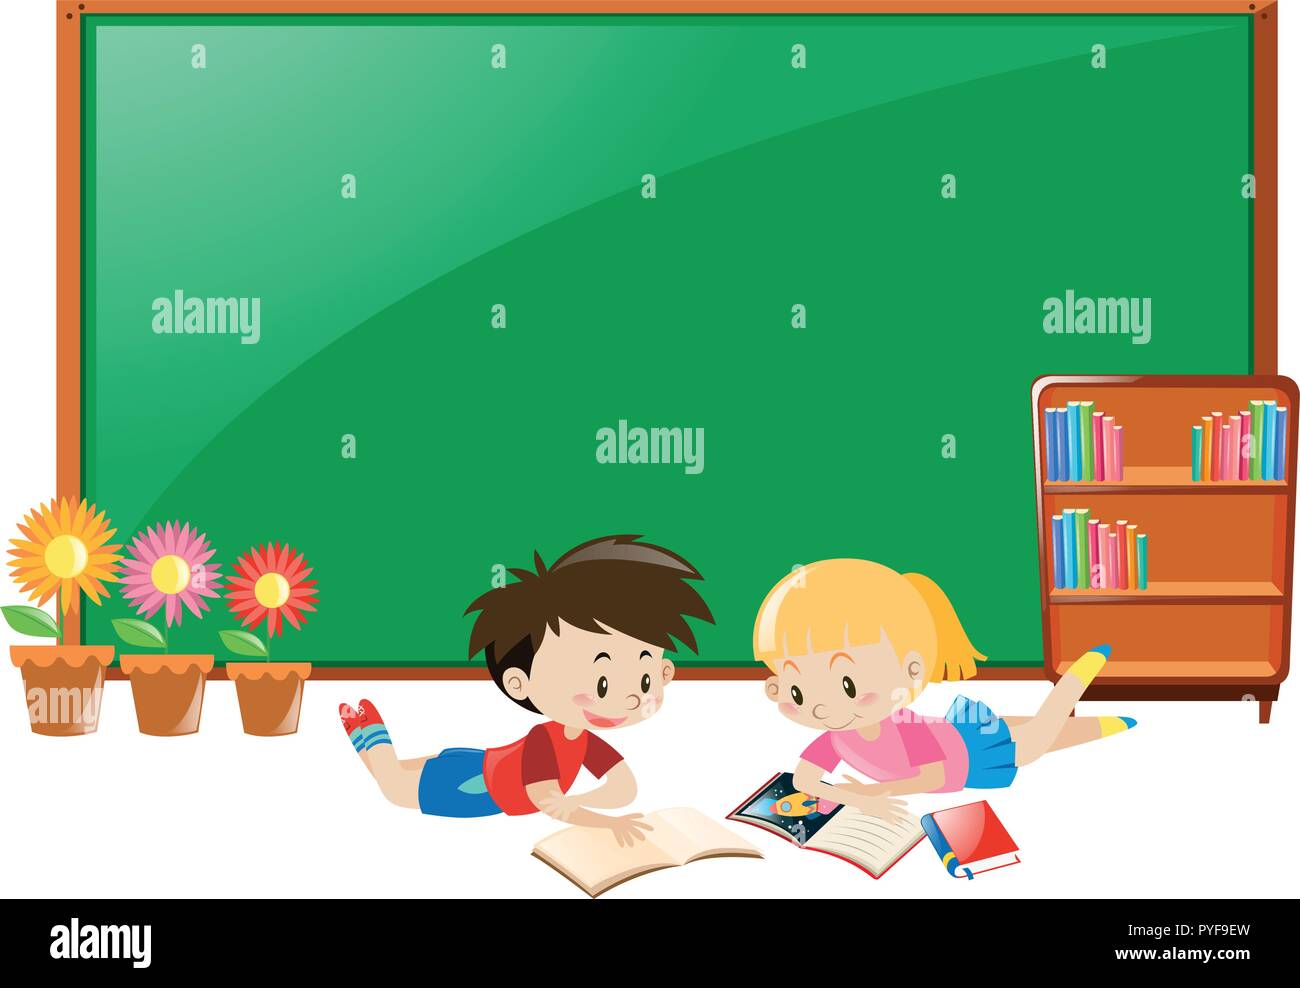 Frame Design With Boy And Girl Reading Books Illustration Stock Vector Image Art Alamy